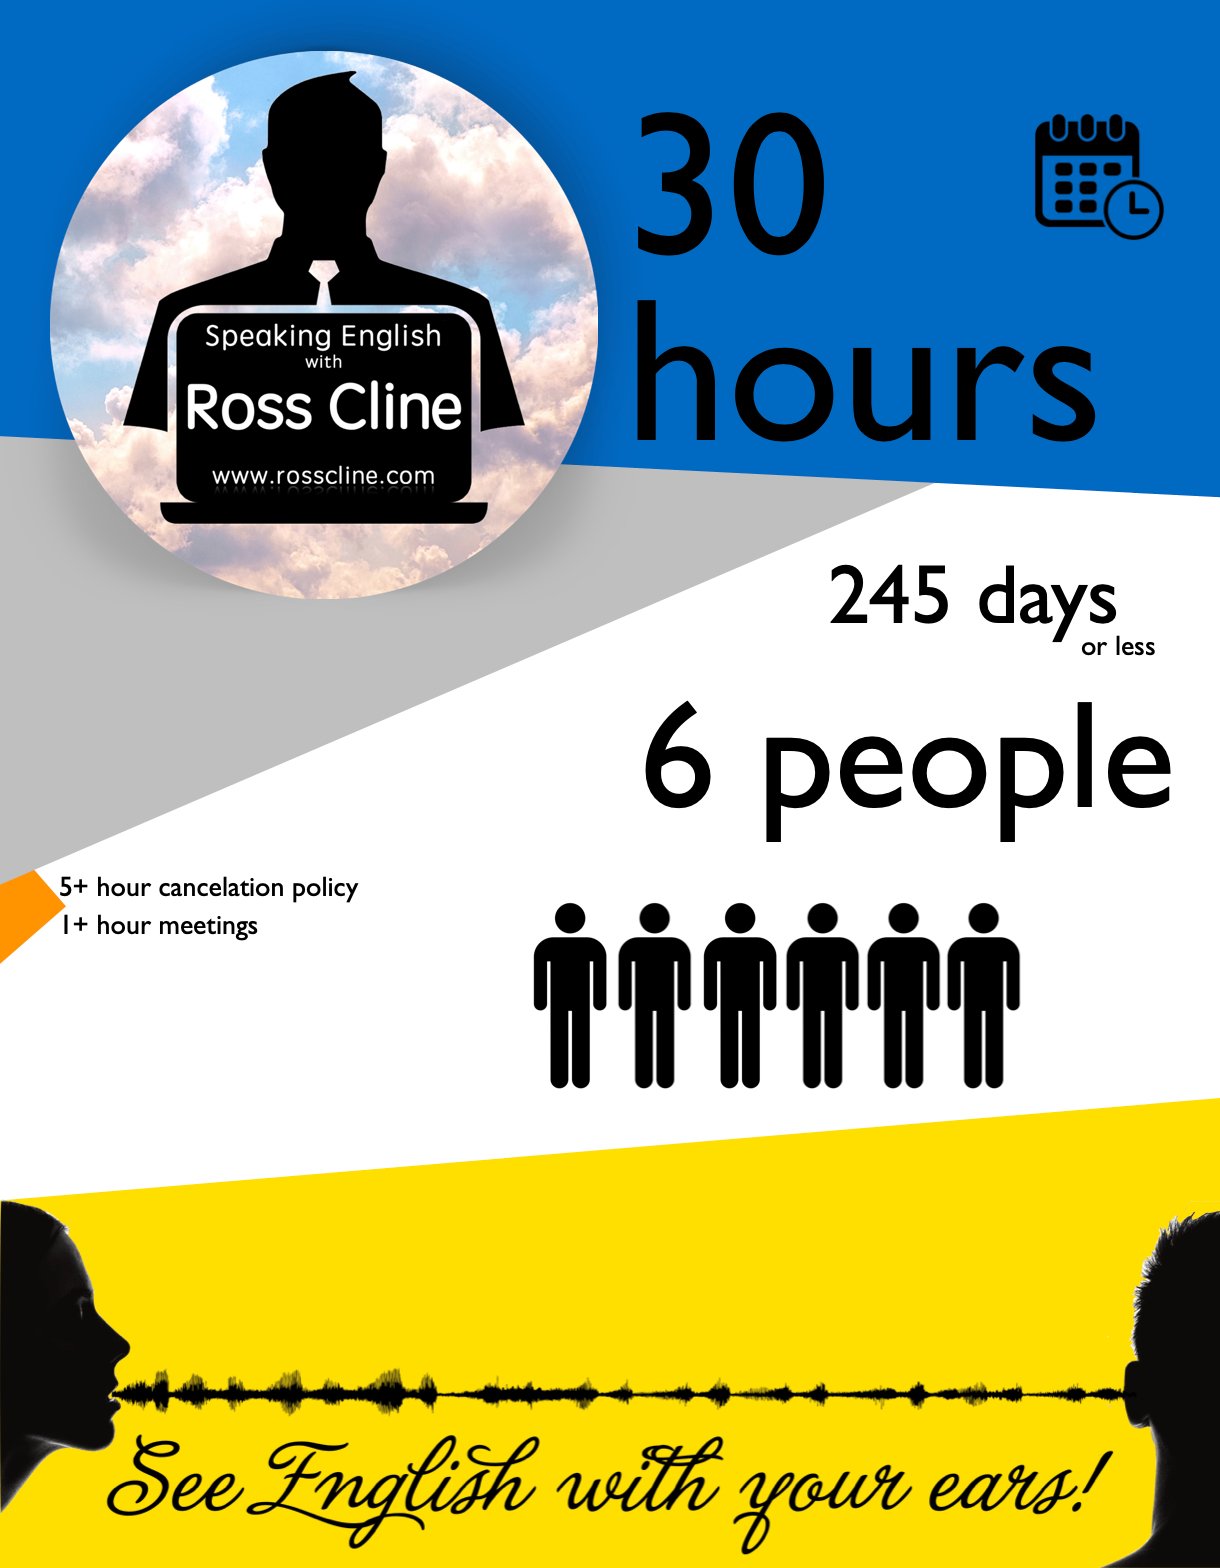 A.) 30 hours of Online Time for 6 people - www.rosscline.com